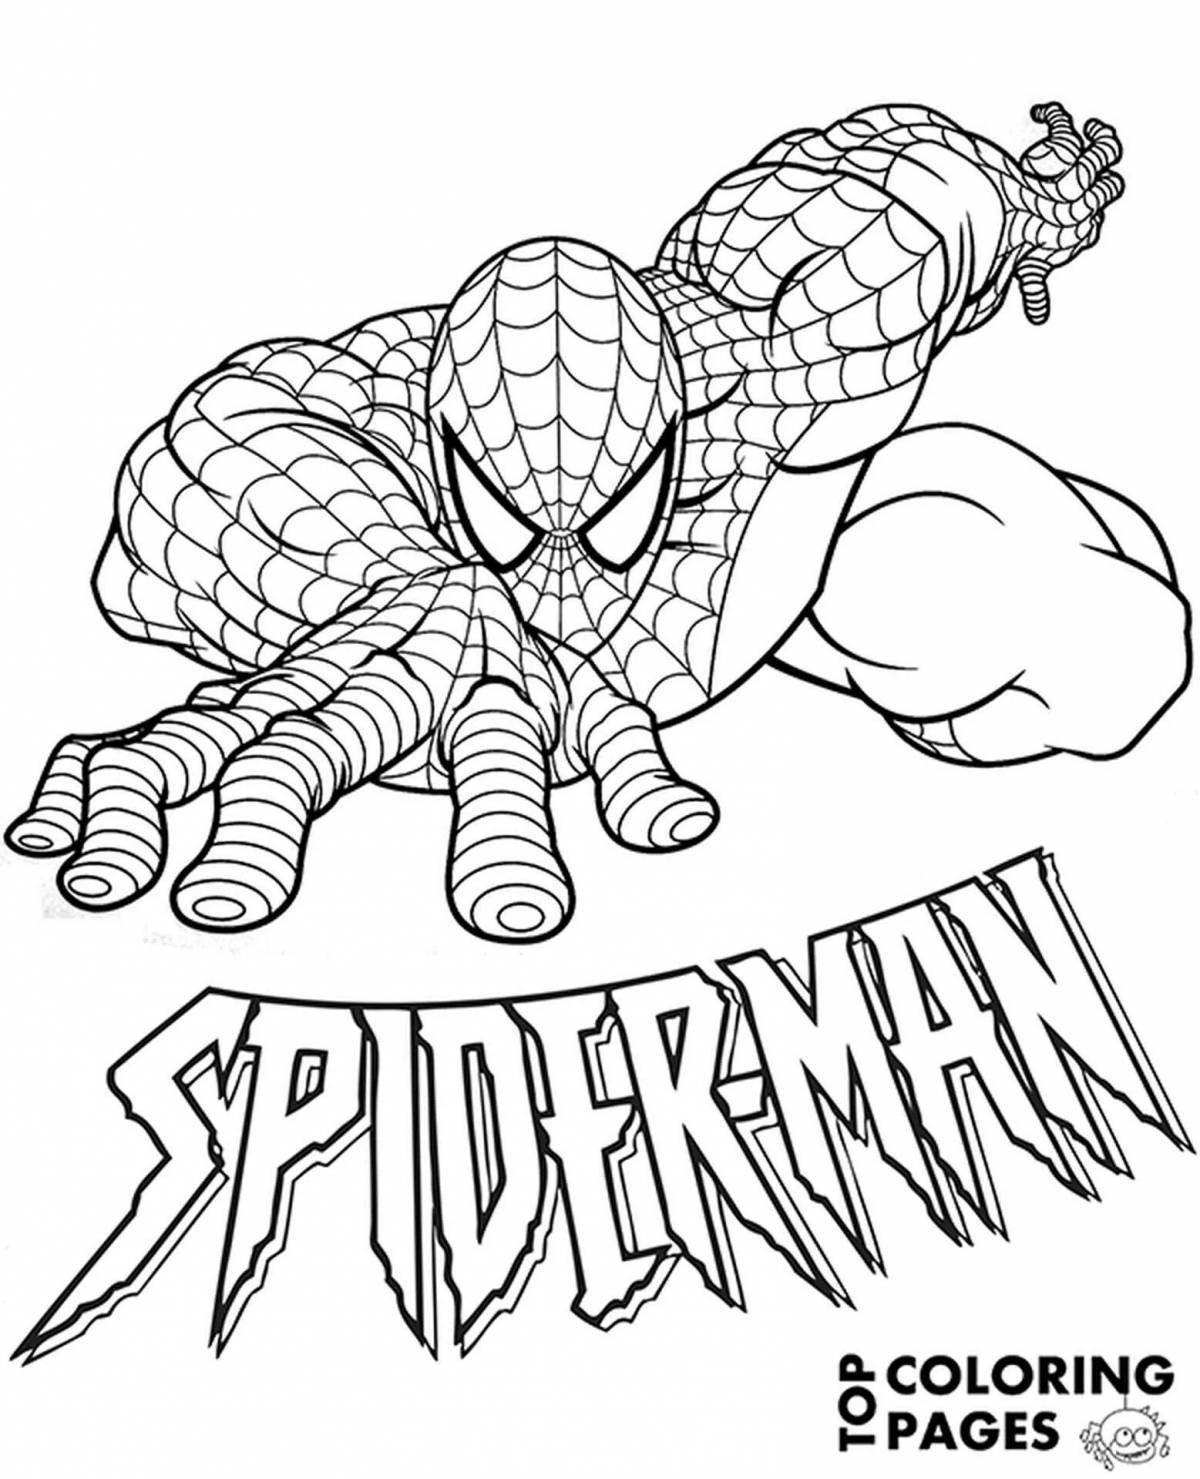 Coloring book shining comic spider-man